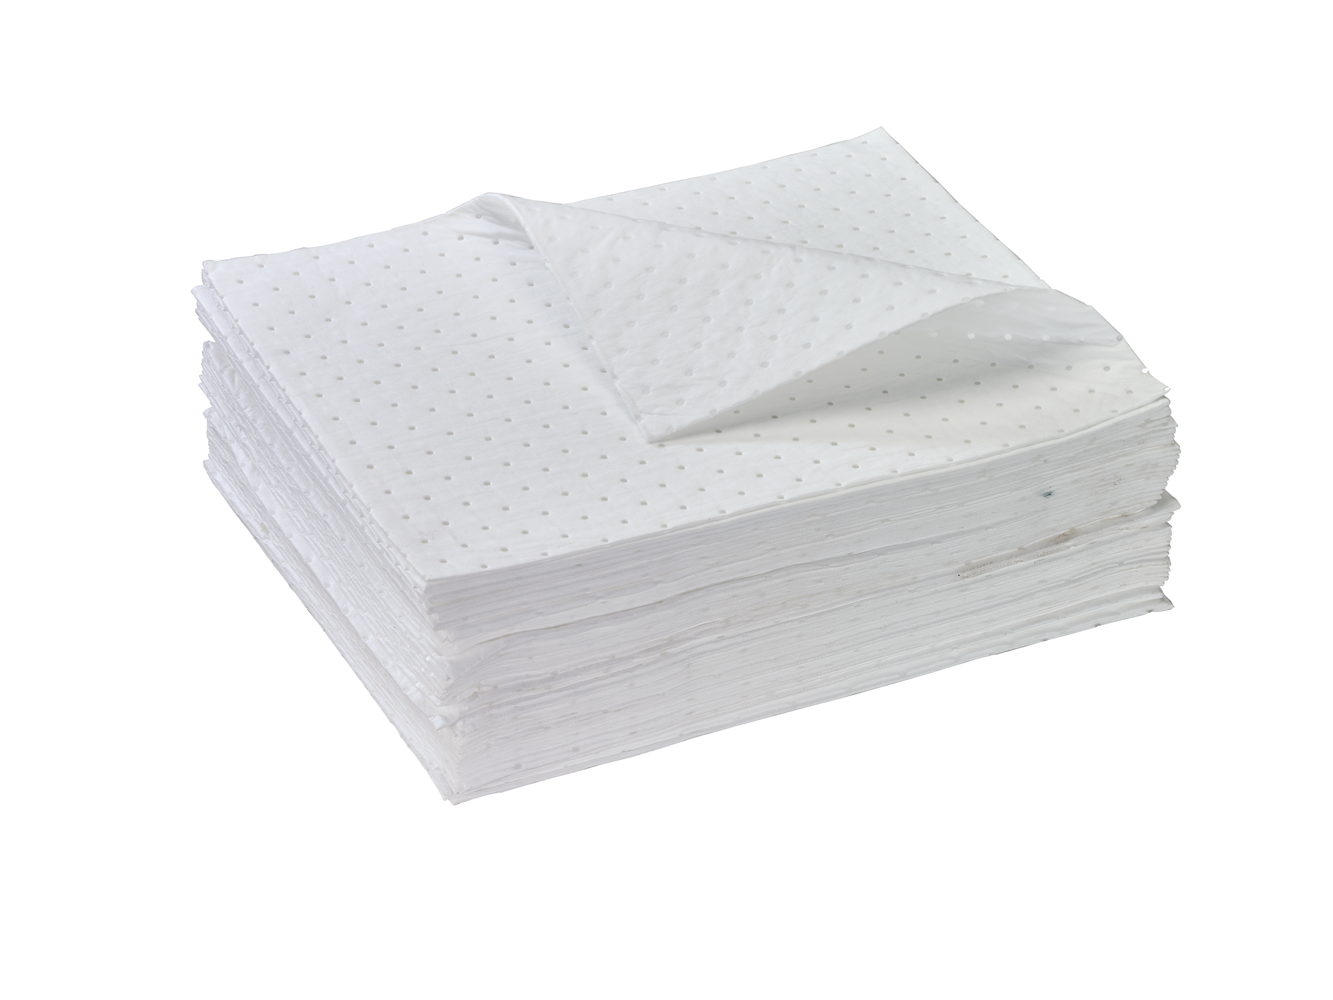 OPD85 Oil Absorbent Pad - Udyogi Safety